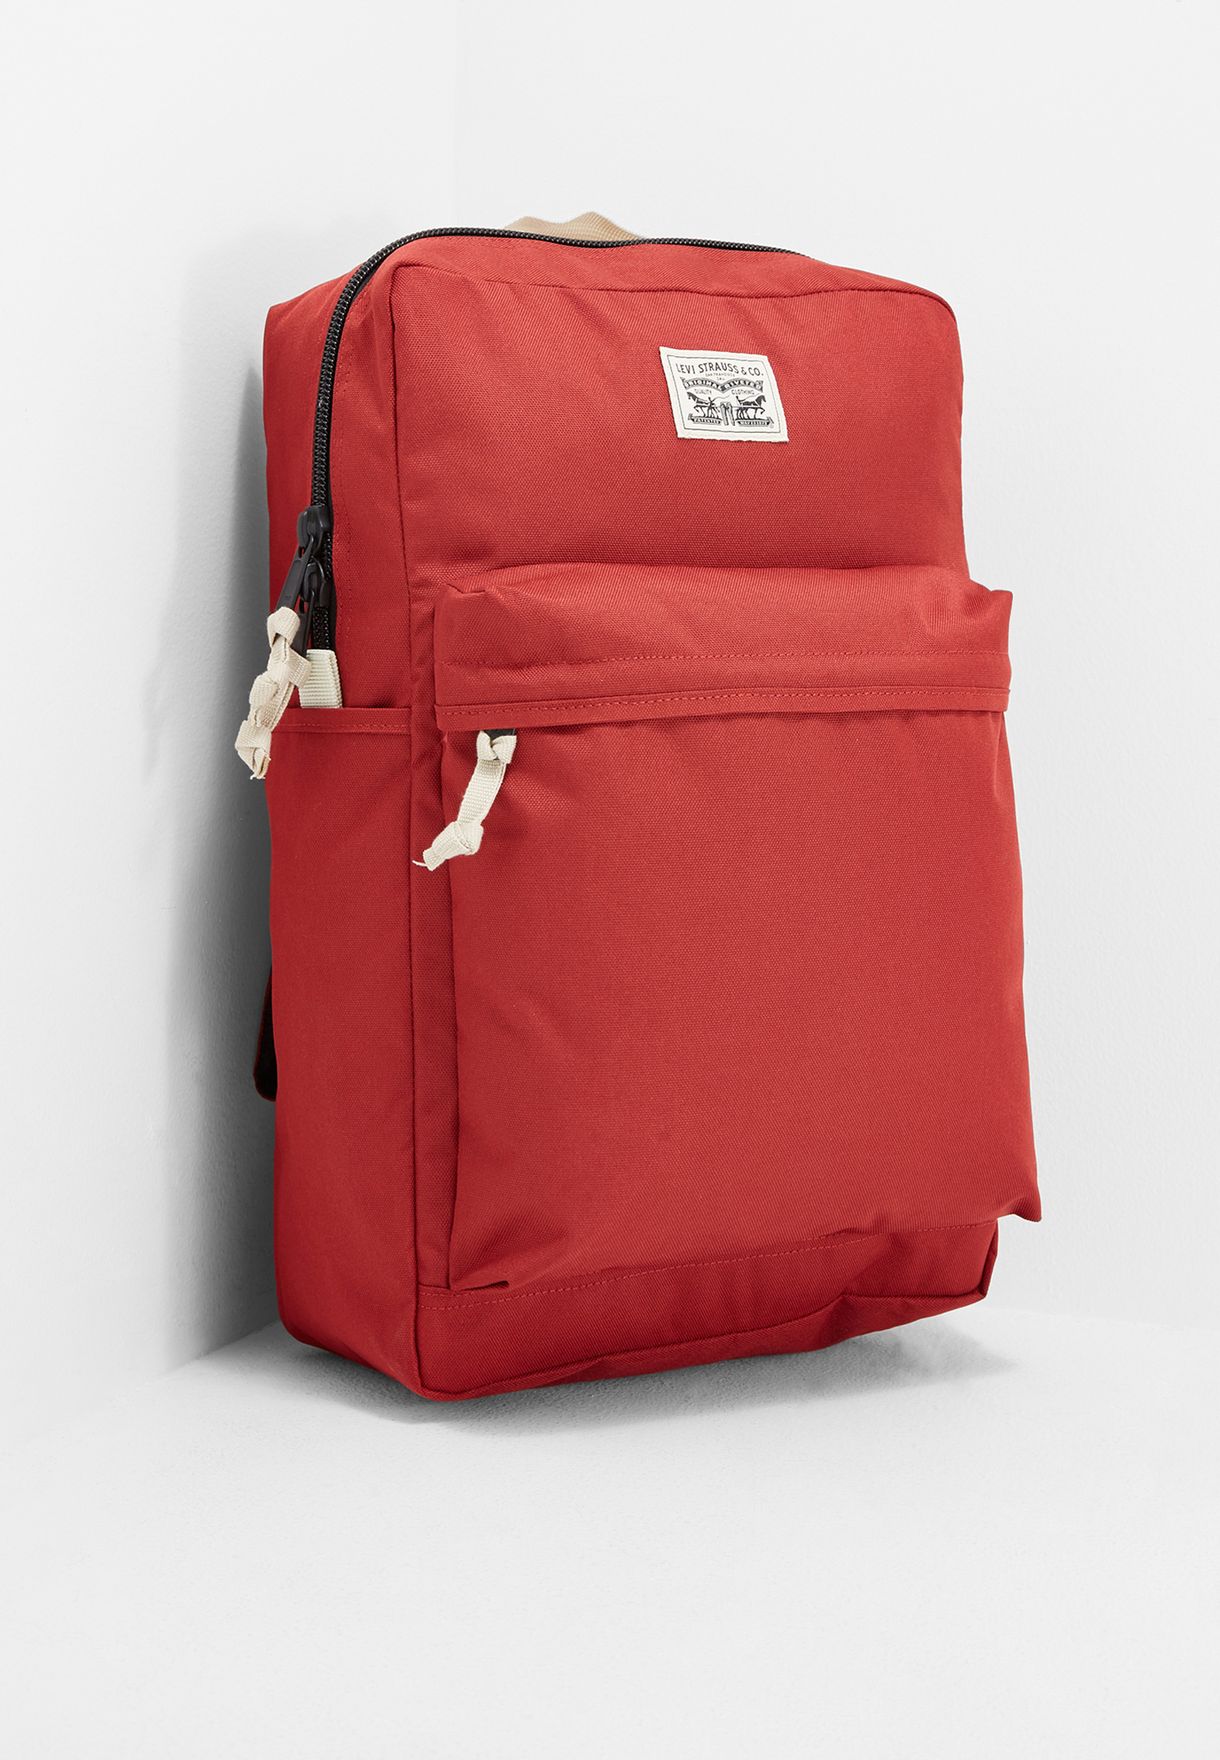 levi's red backpack